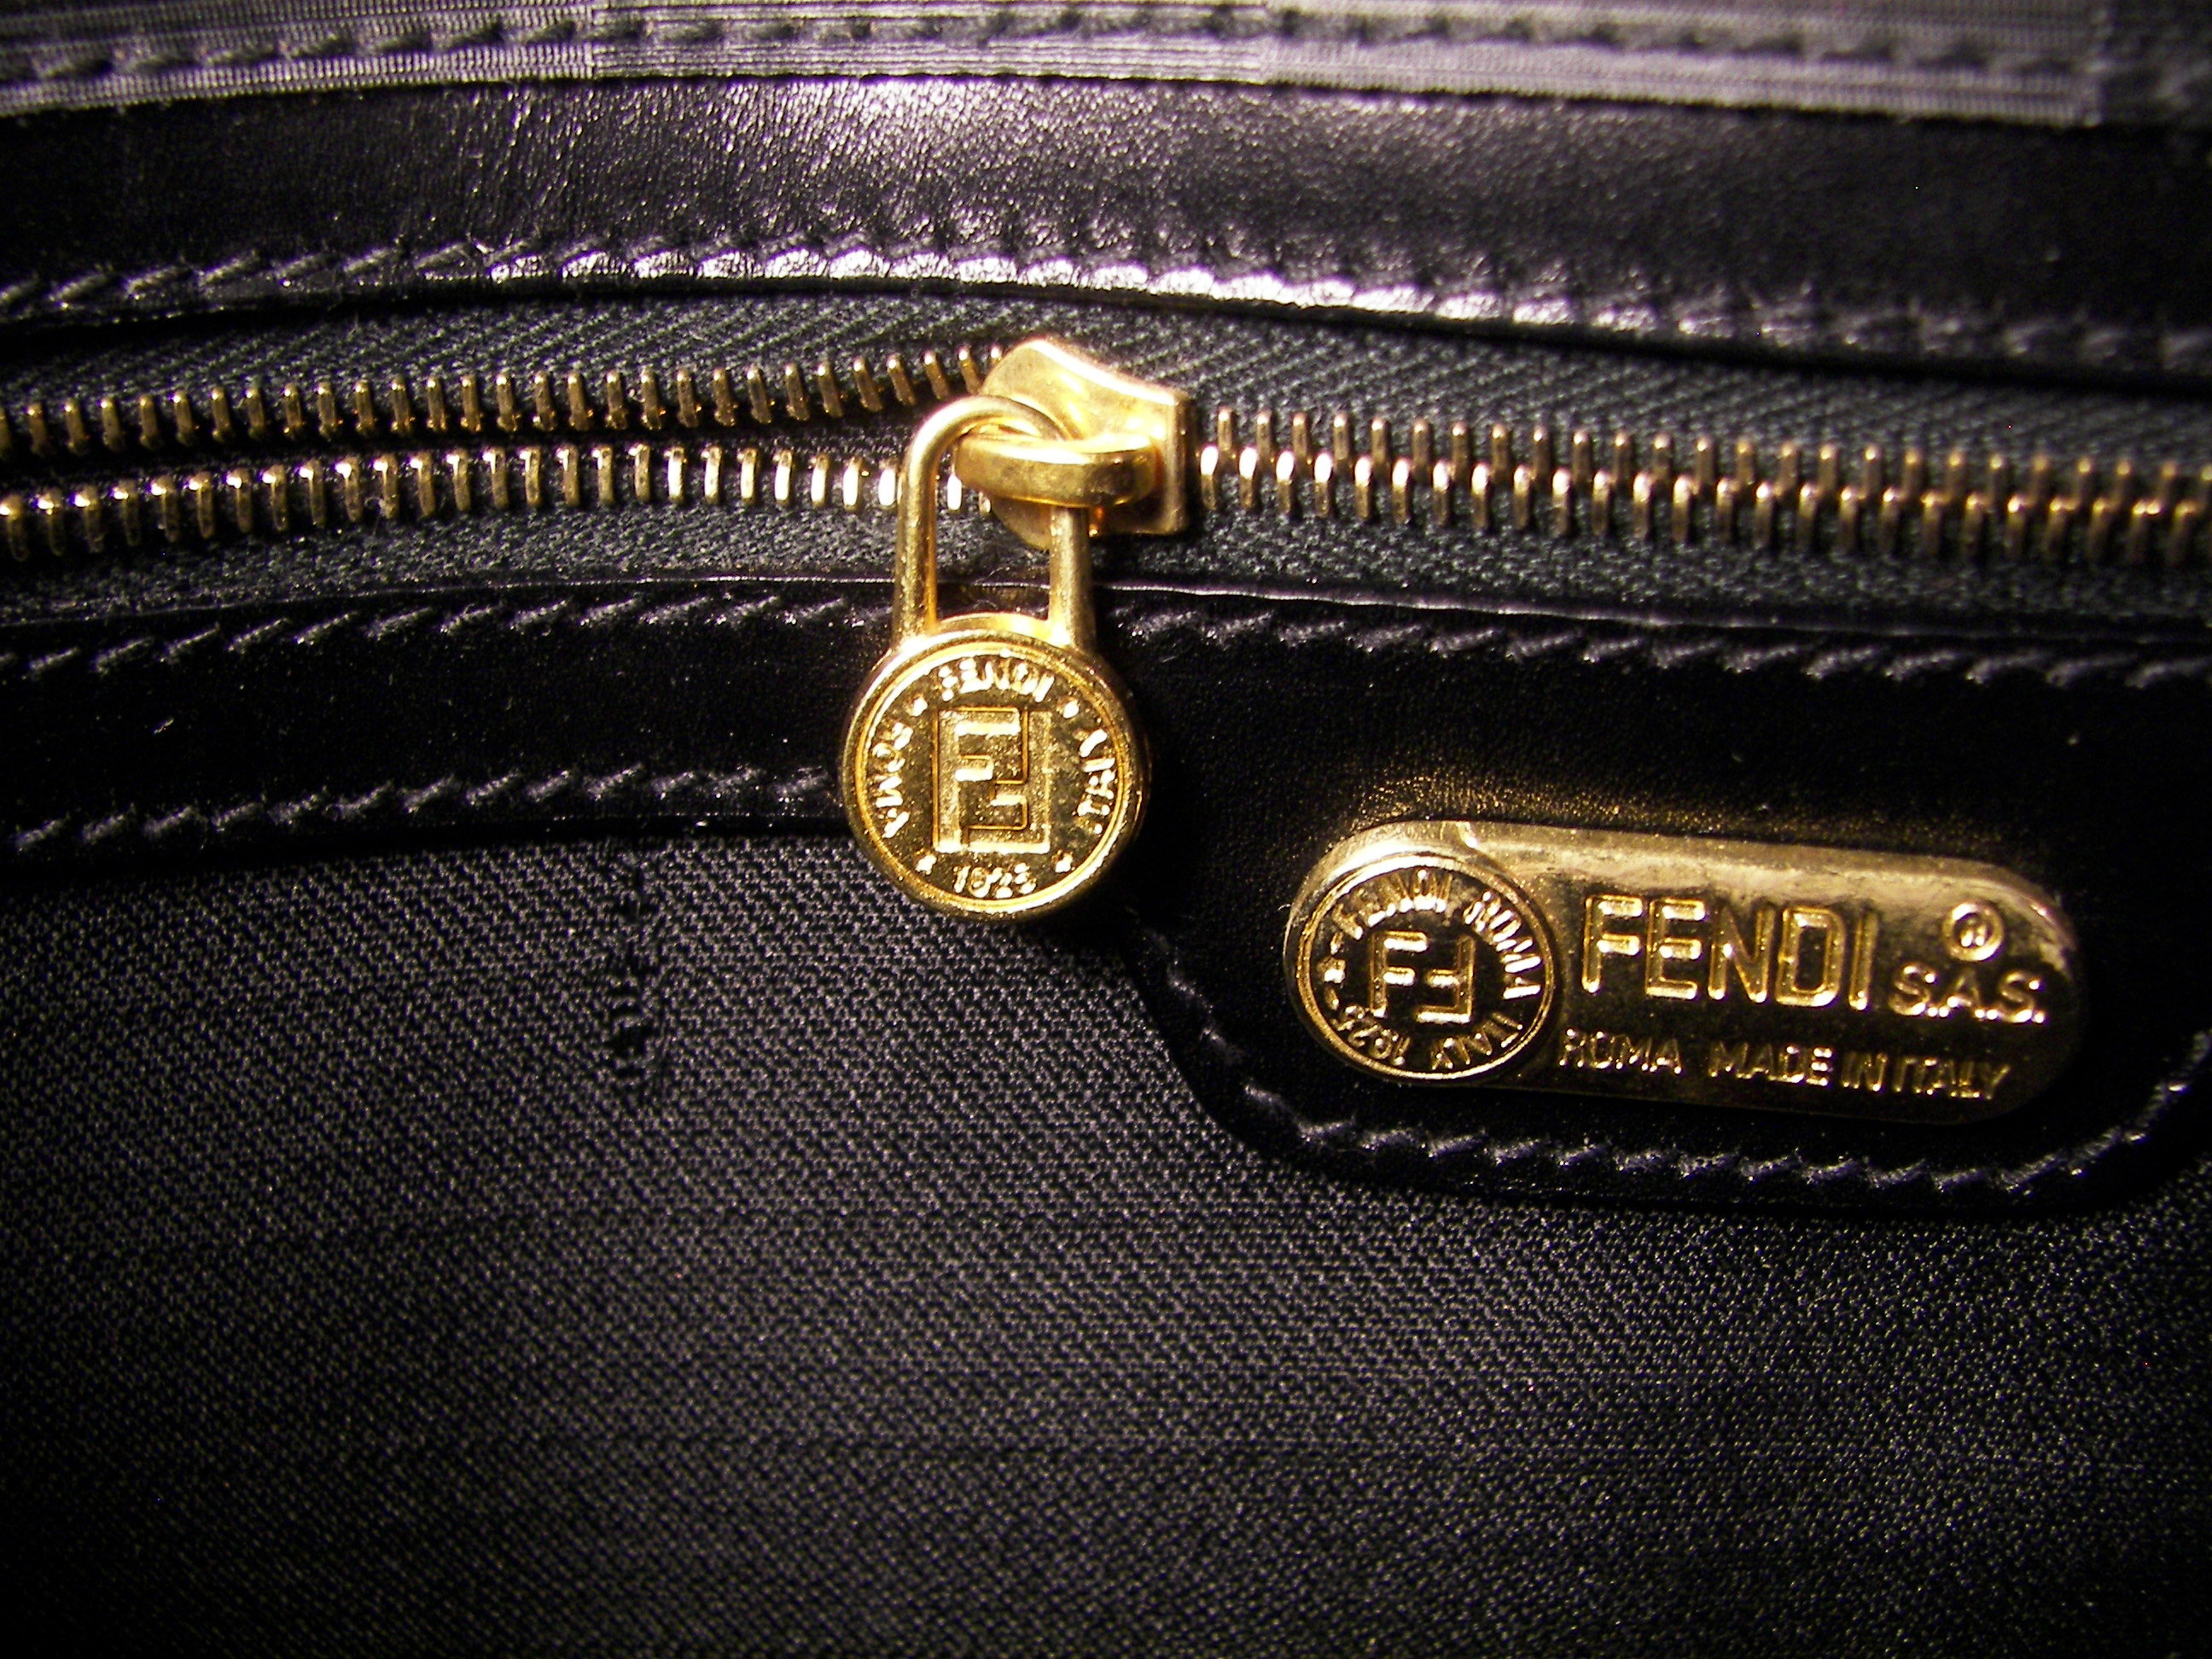 how to tell if a vintage fendi bag is real